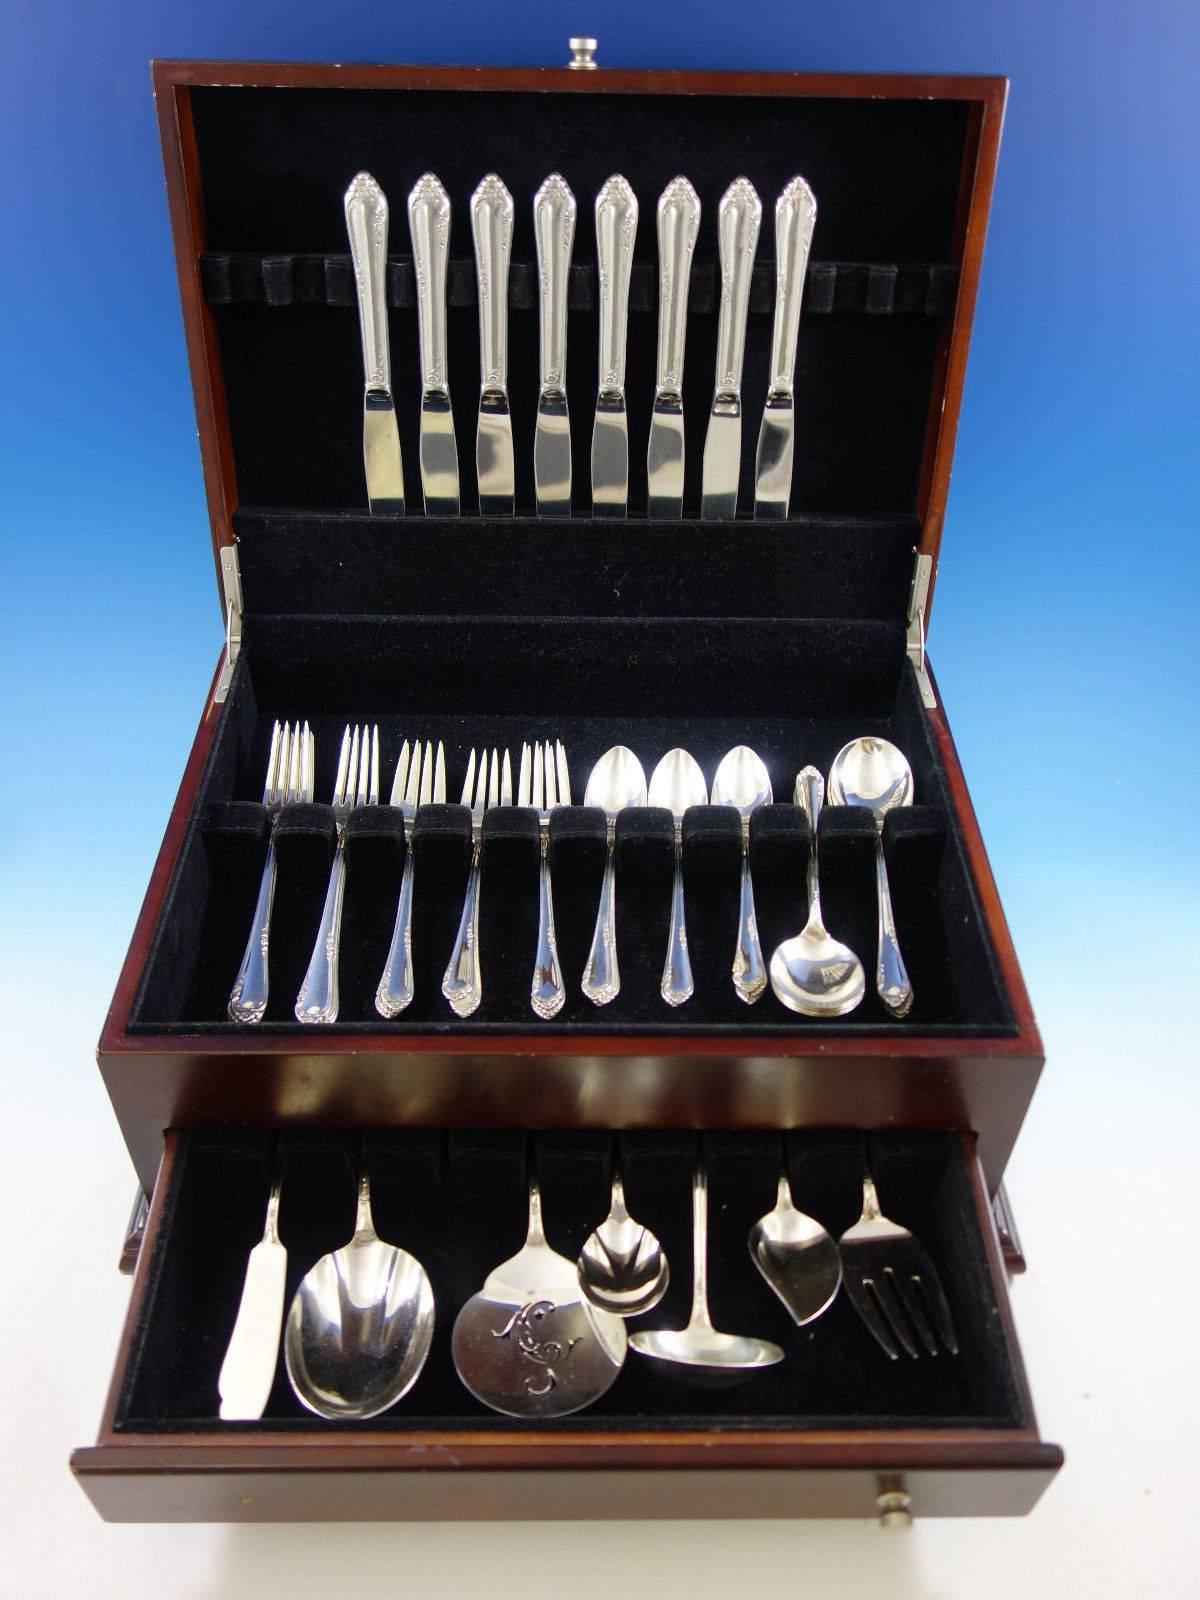 Dancing flowers by Reed and Barton sterling silver flatware set of 47 pieces. This set includes: 

Eight knives, 8 7/8